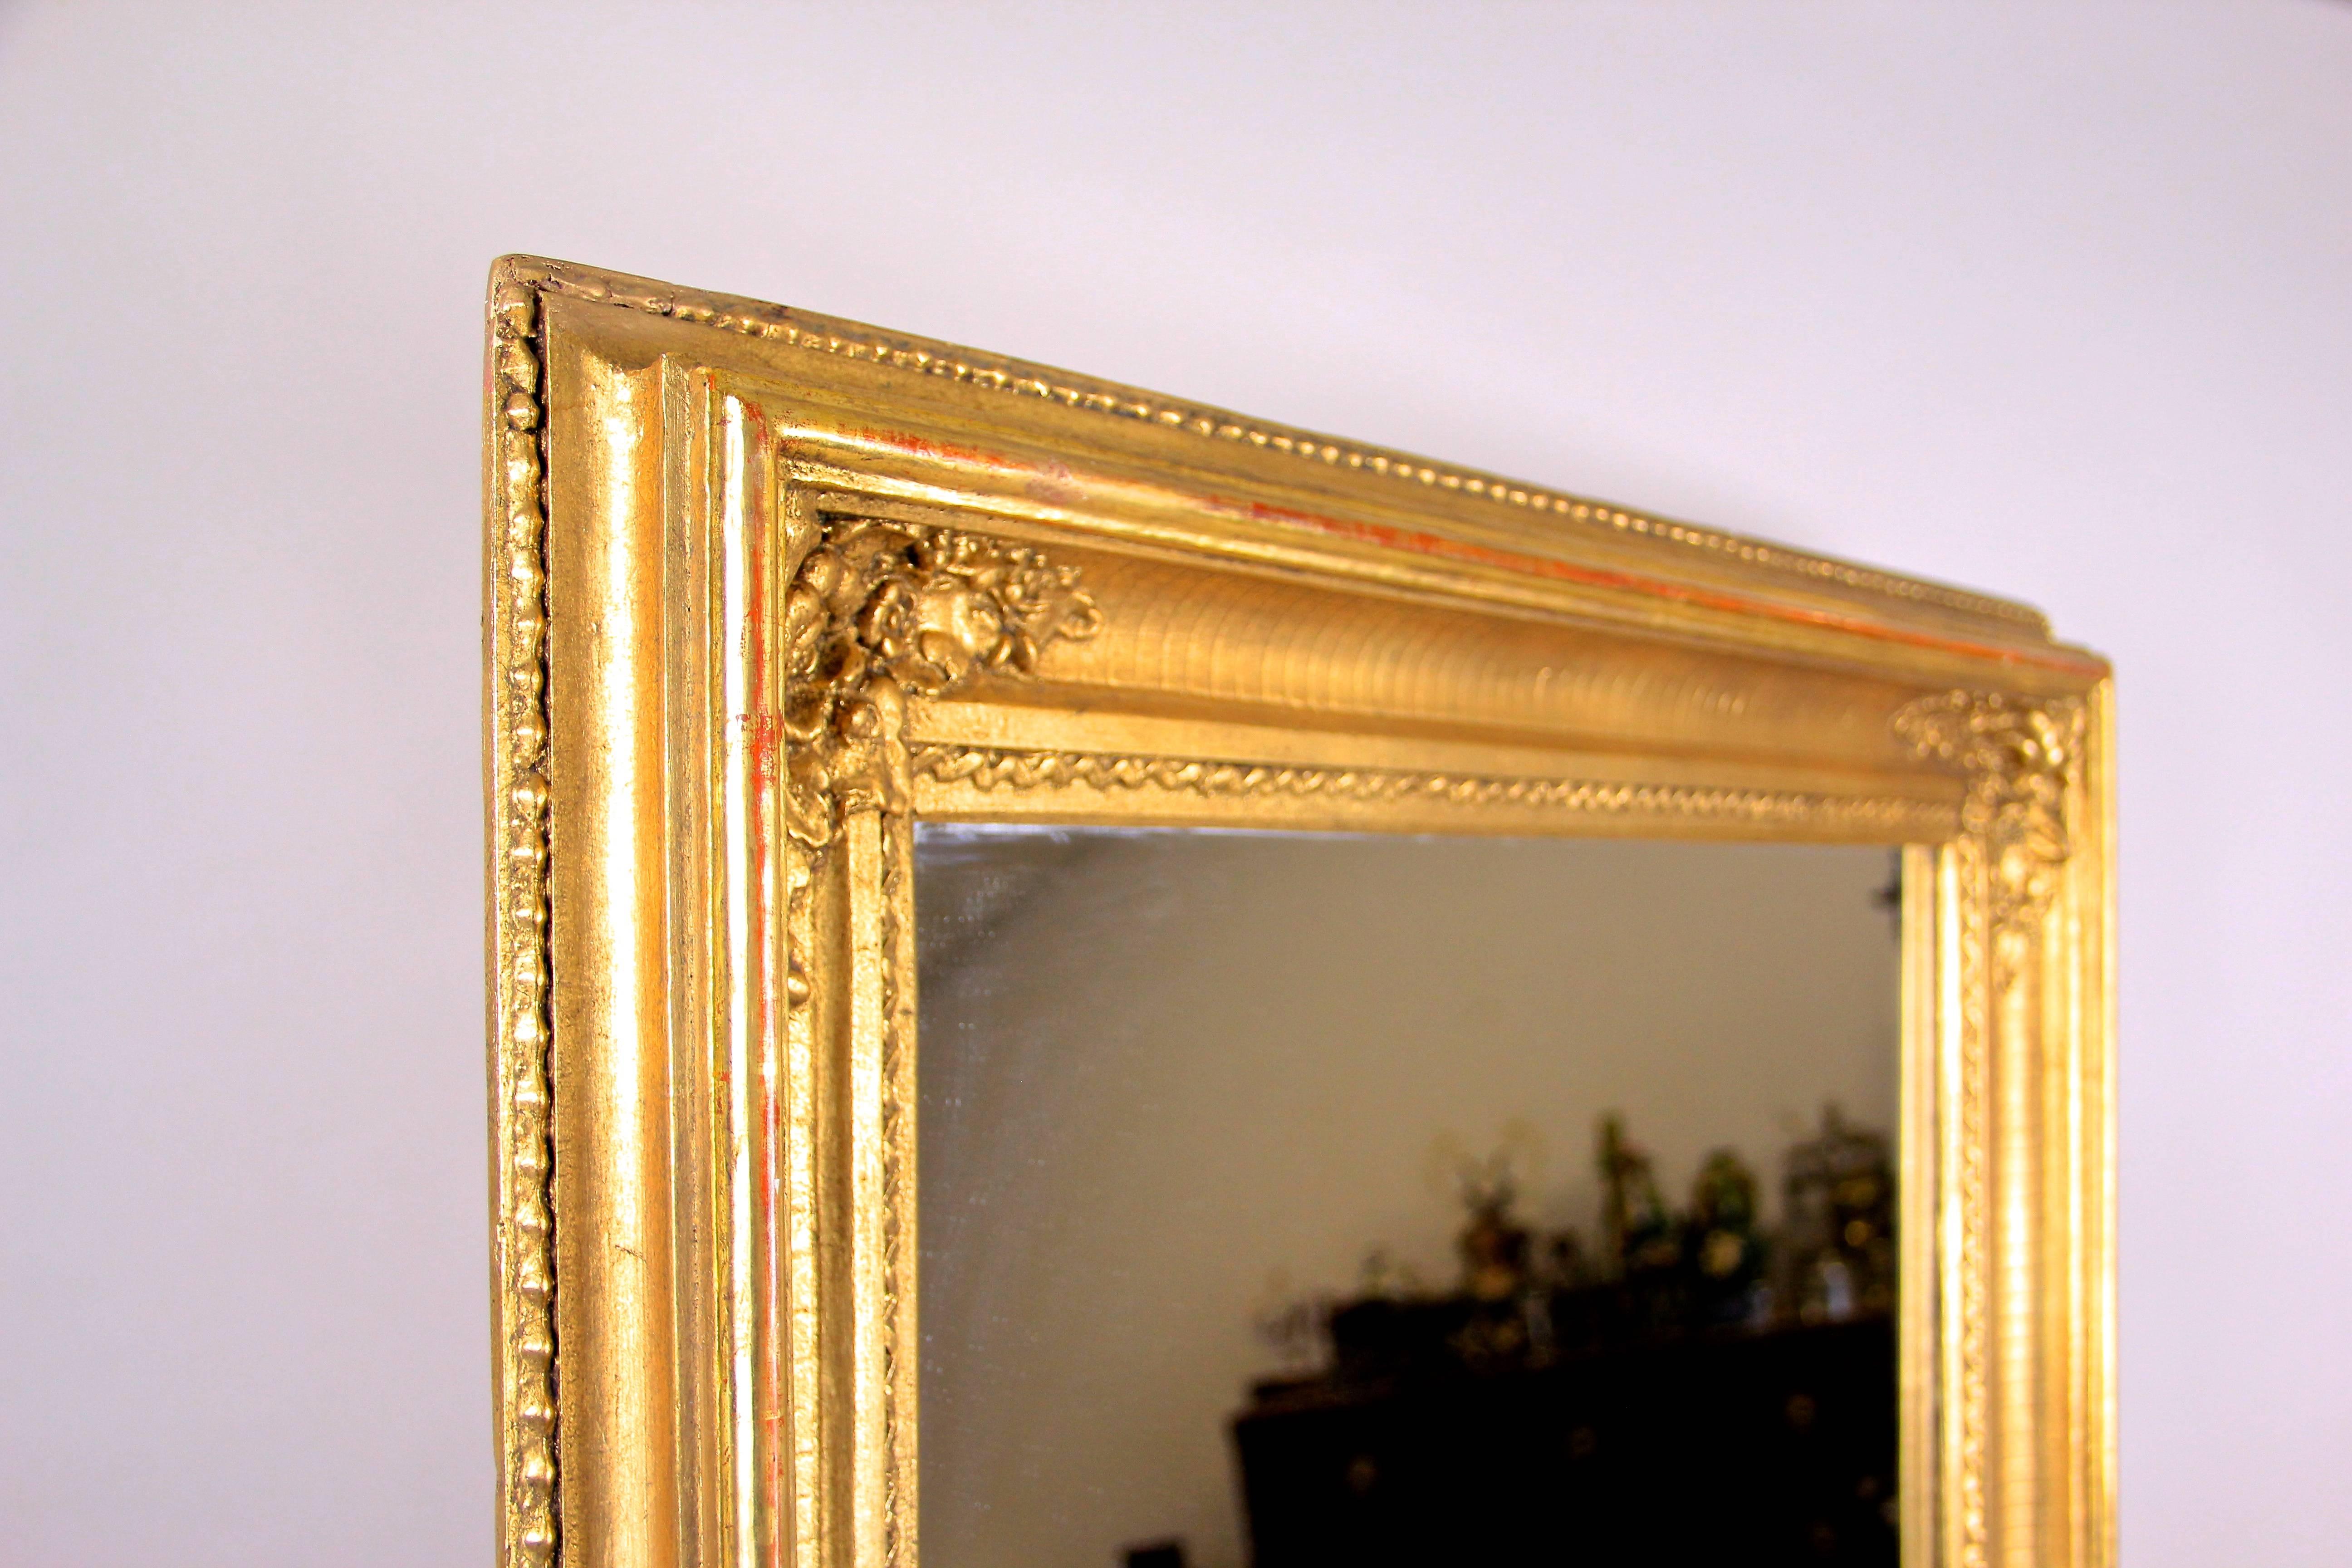 Beautiful golden Biedermeier wall mirror out of Austria dating back to circa 1850. The precious surface shows extensive gilt techniques and artfully processed floral stucco motifs in each corner. The gold leaf covered outer strip show the red